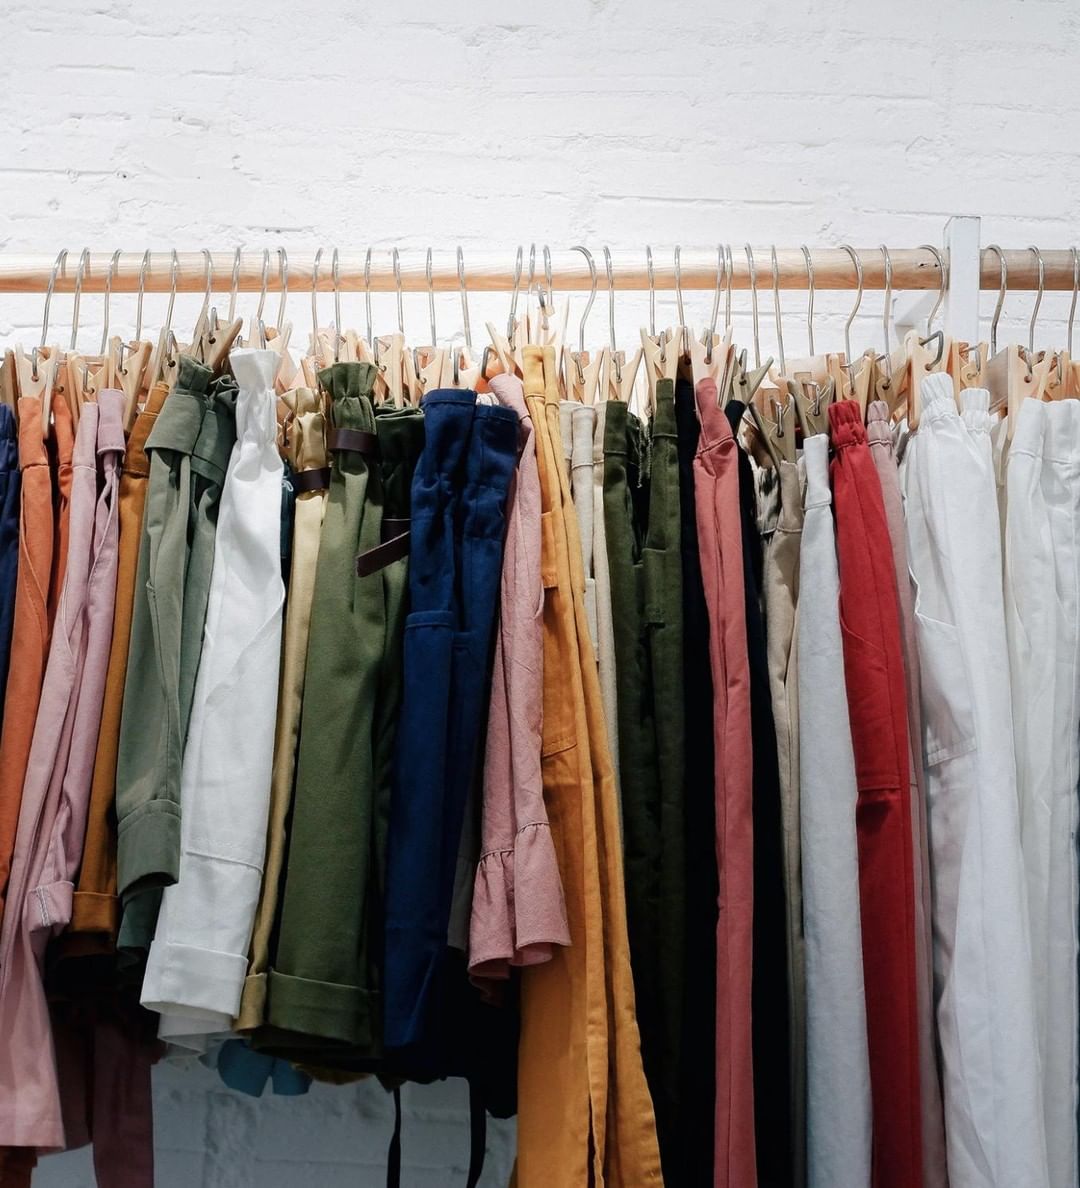 Women's Shorts, Pants, and Jackets on a Hanging Rack in a Store. Photo by Instagram user @goodwillnynj